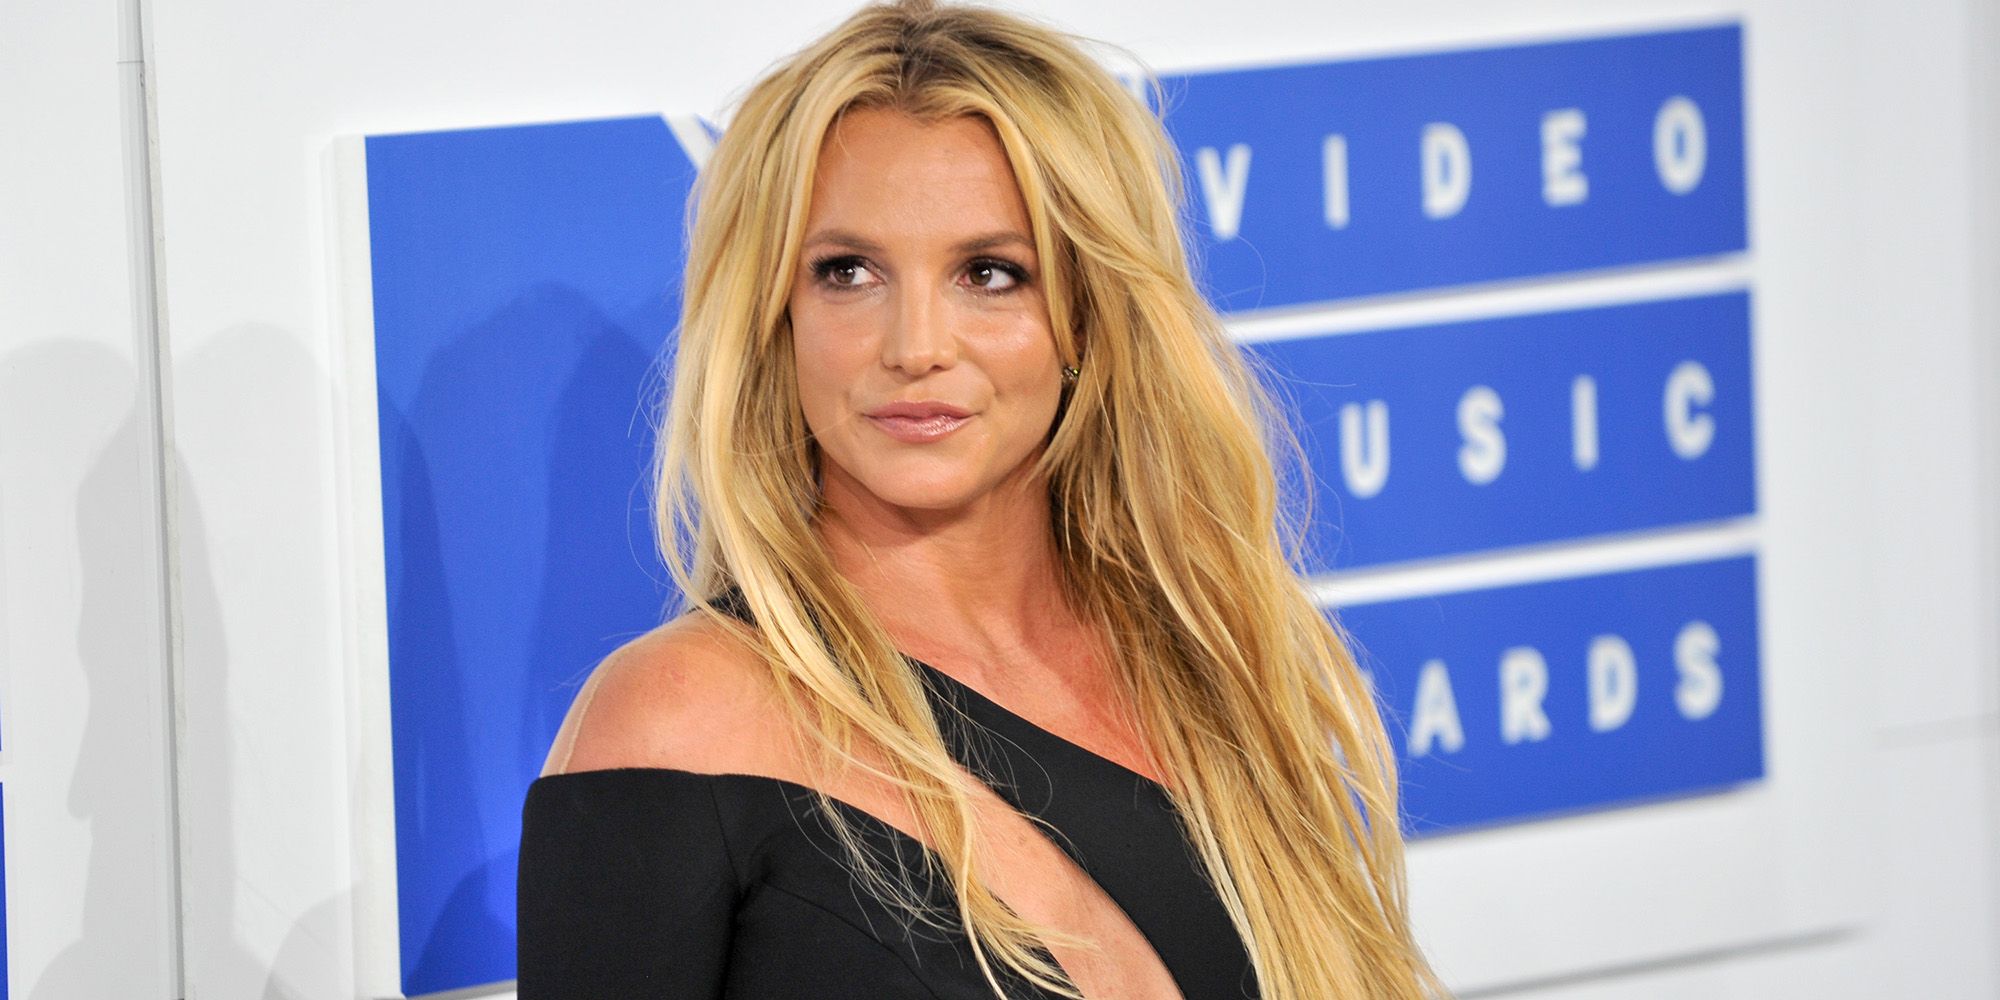 Britney Spears Posted Steamy Photos While Vacationing in London